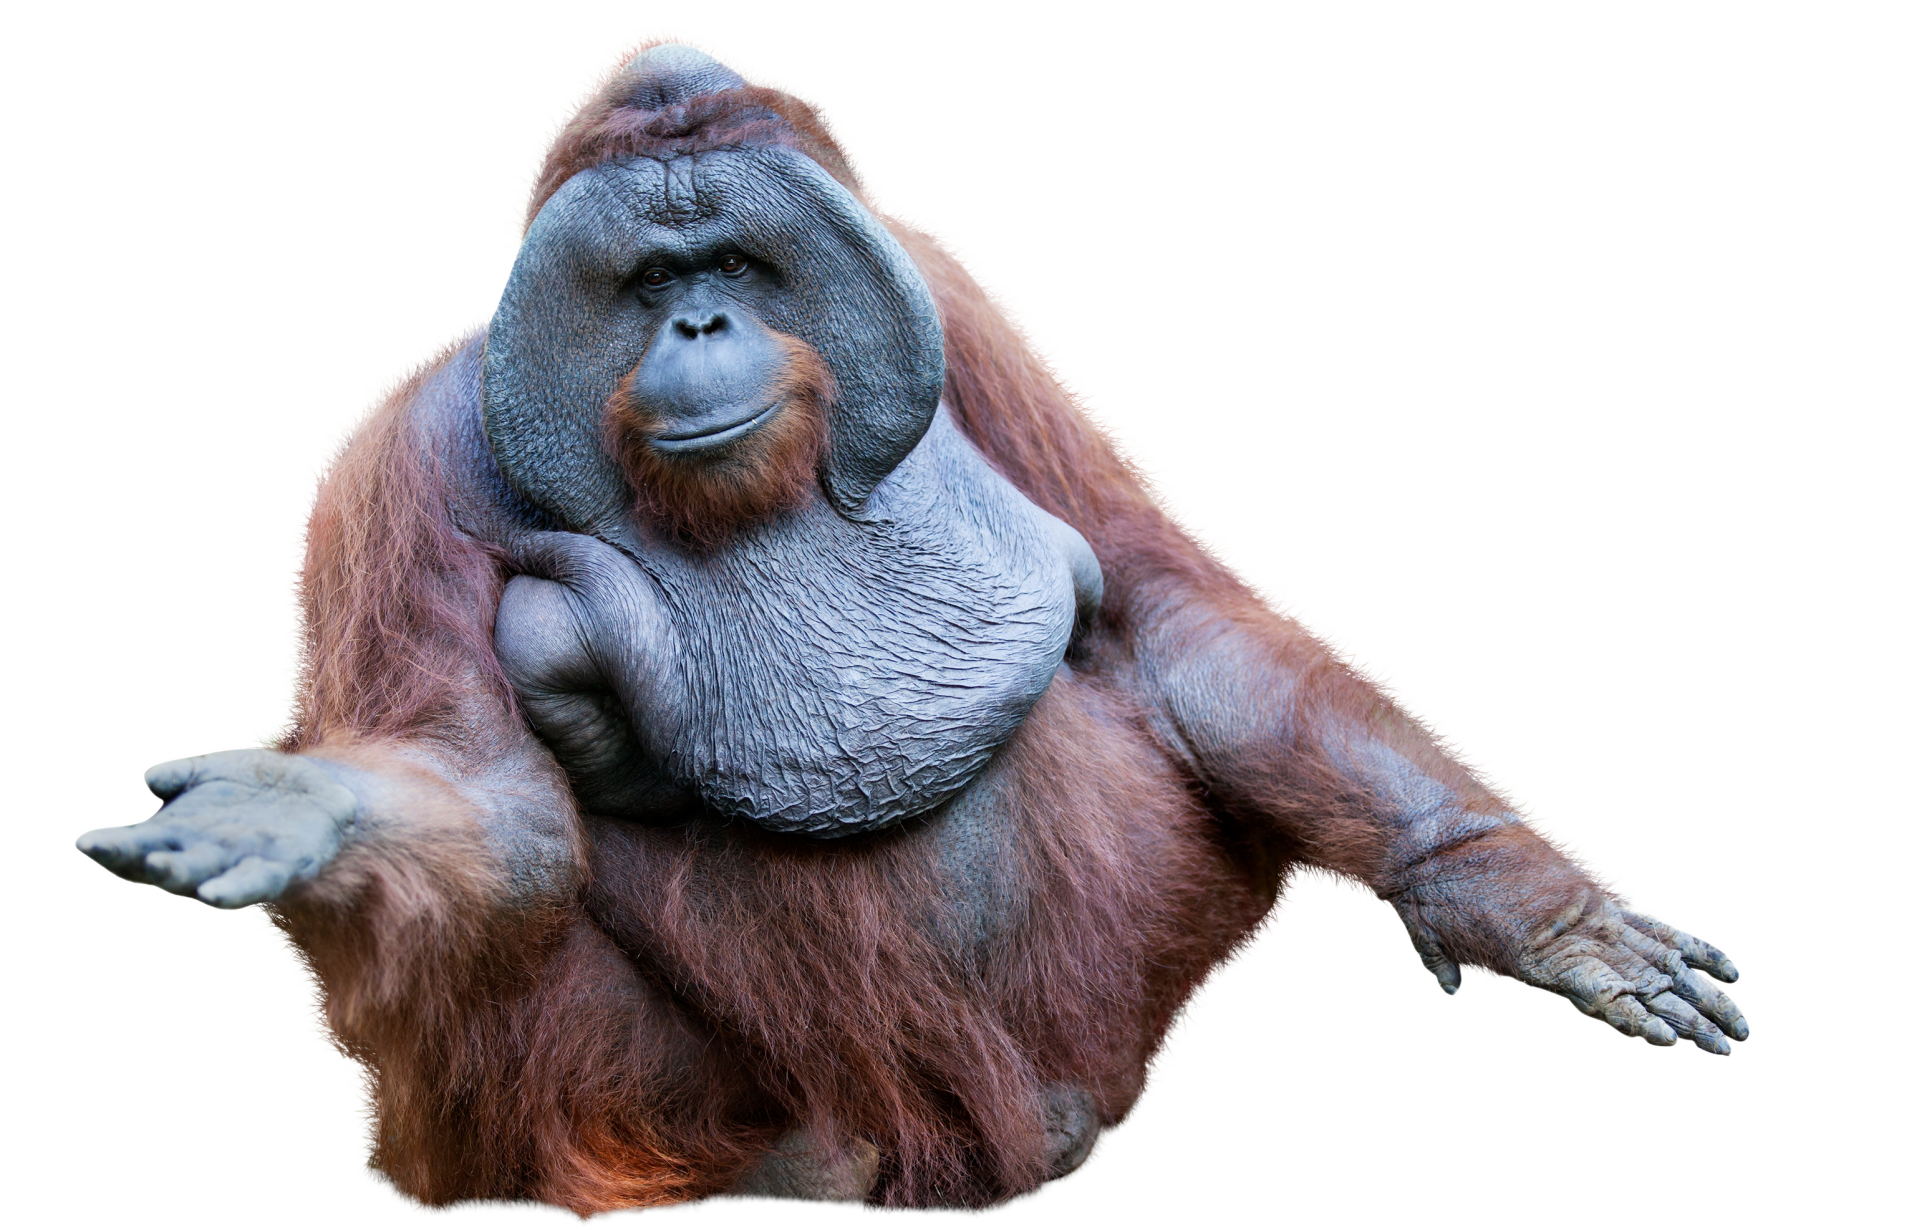 a large orangutan is sitting down with its arms outstretched on a white background .